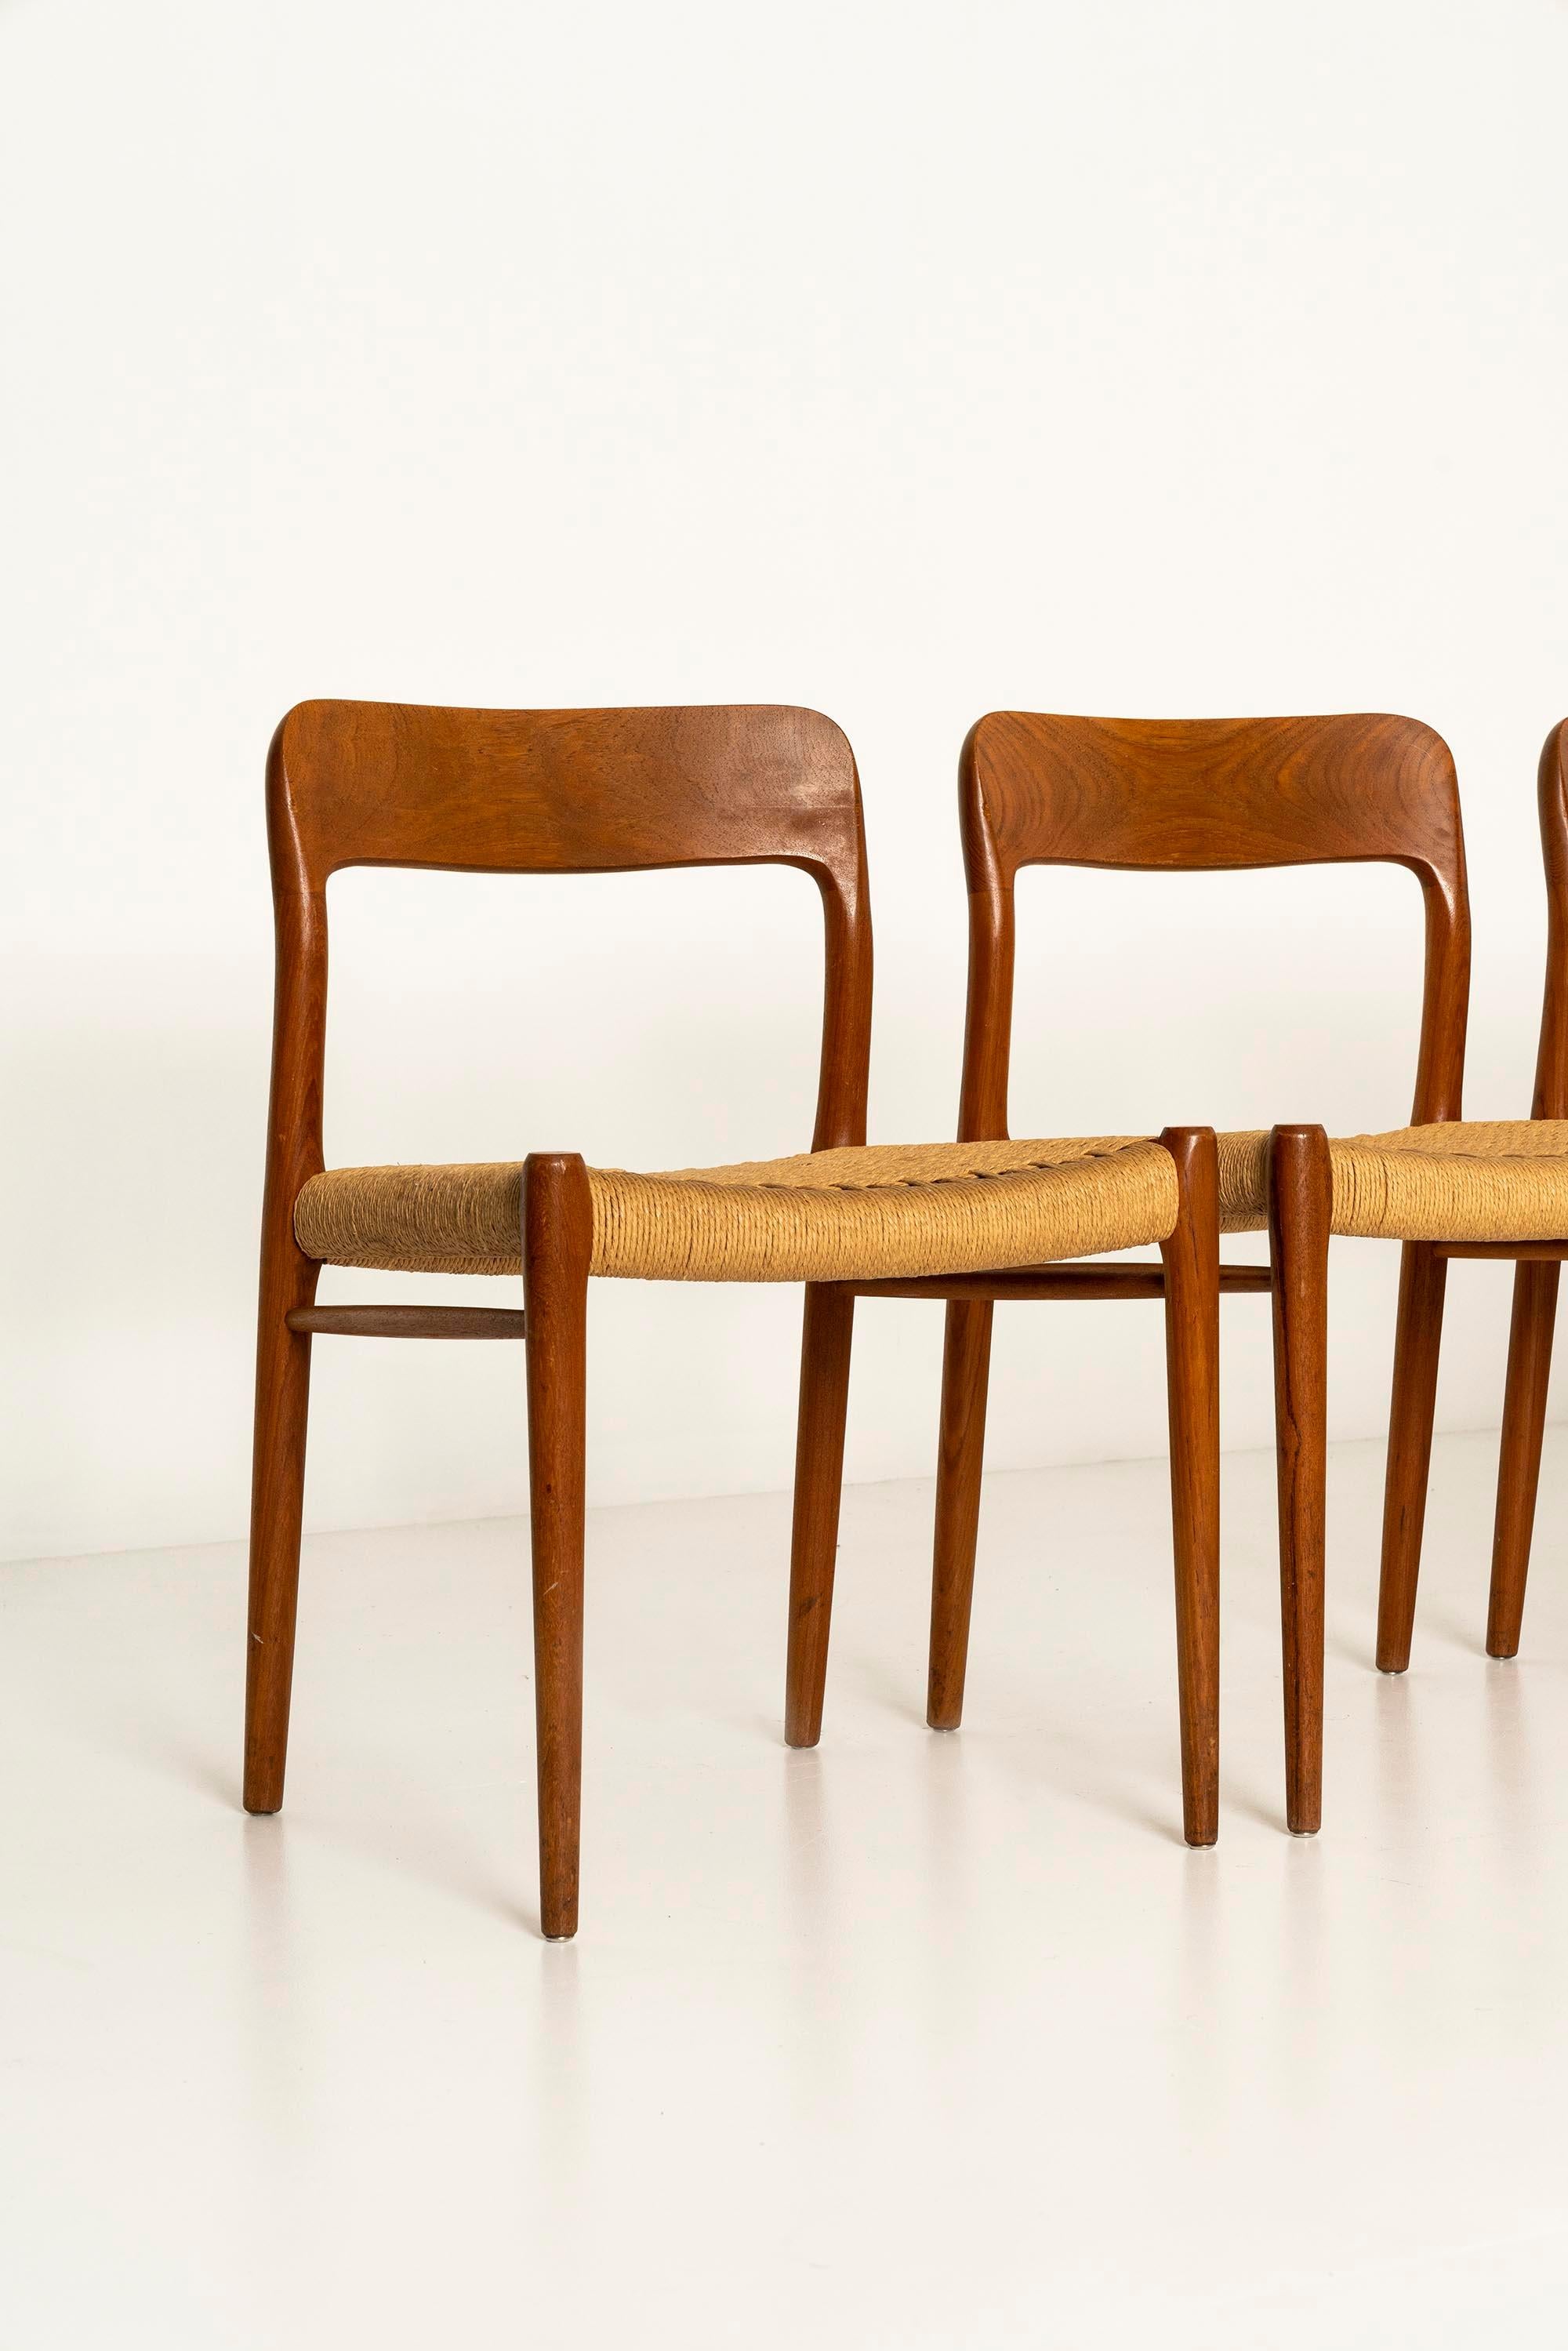 10 Niels Otto Møller 'Model 75' Chairs in Teak and Danish Paper Cord, 1960s For Sale 1